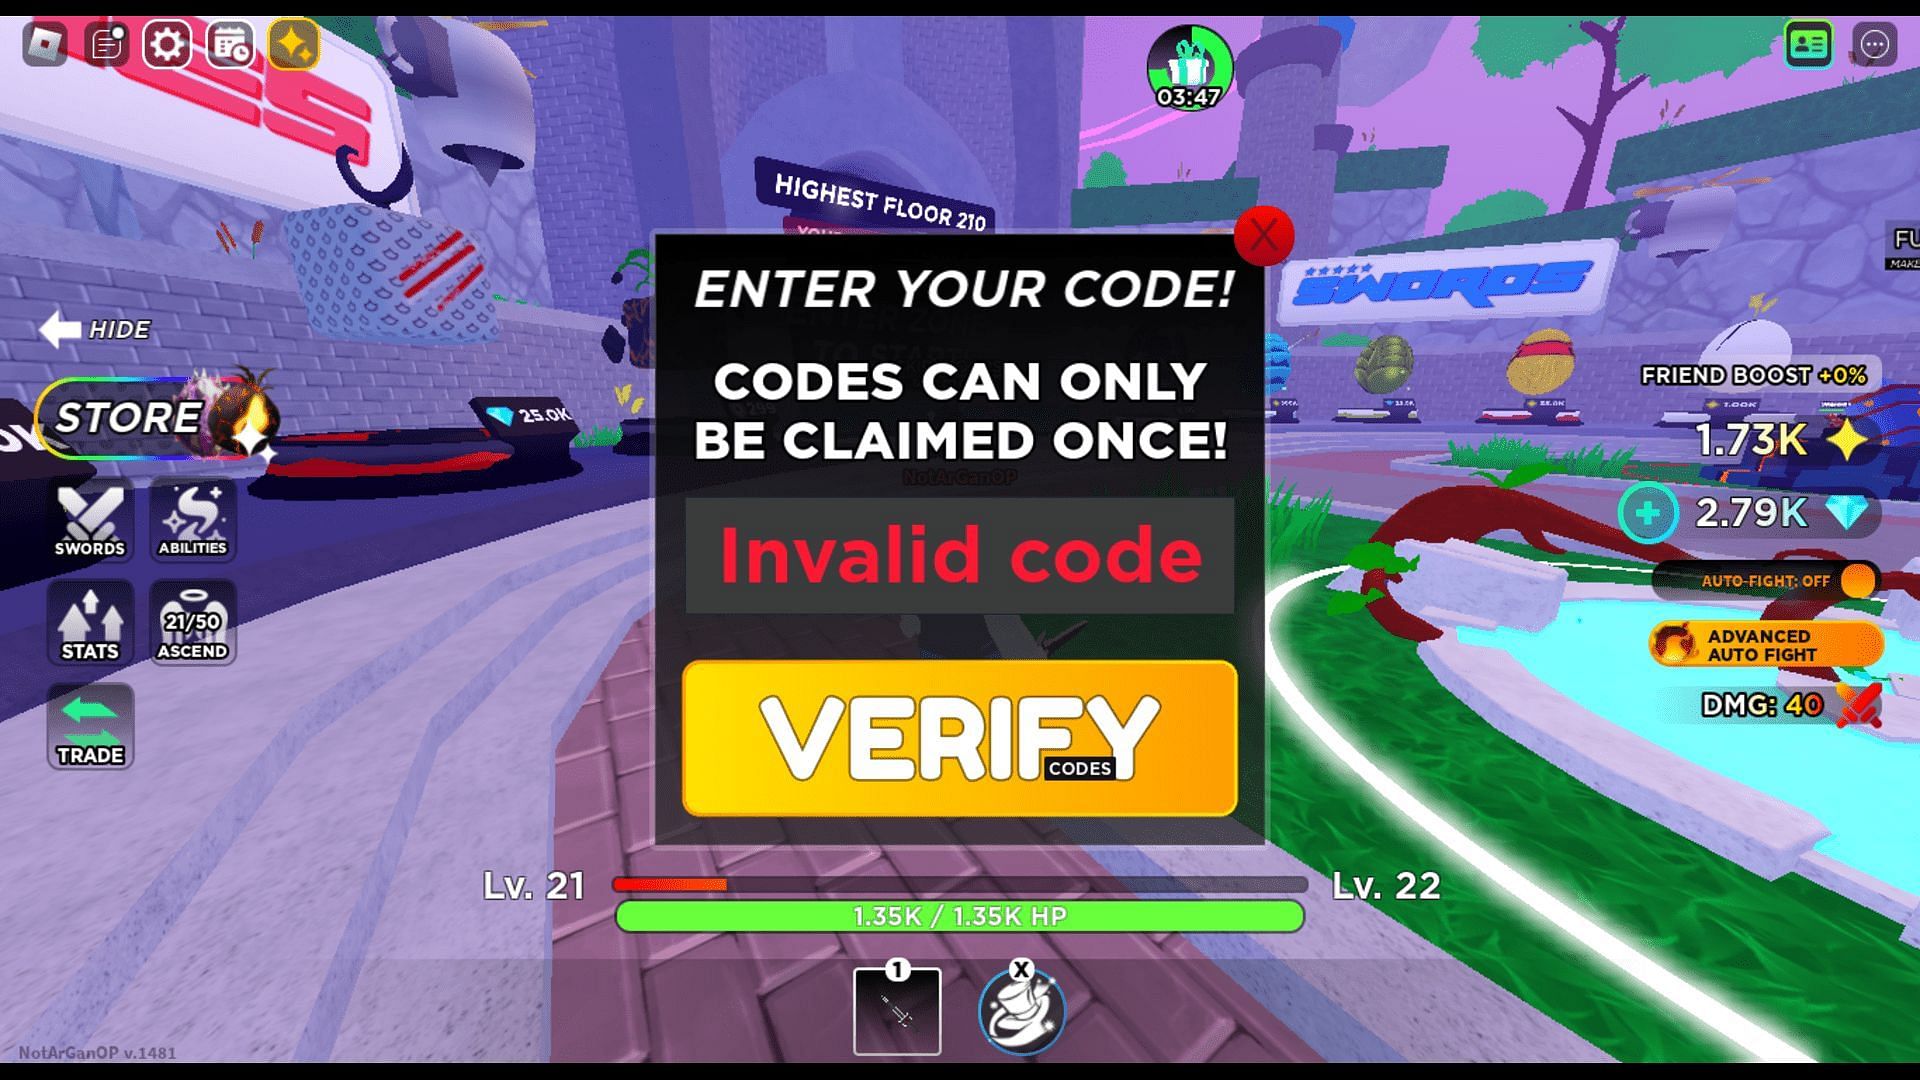 Troubleshoot codes in Anime Battlegrounds Y with ease (Image via Roblox)